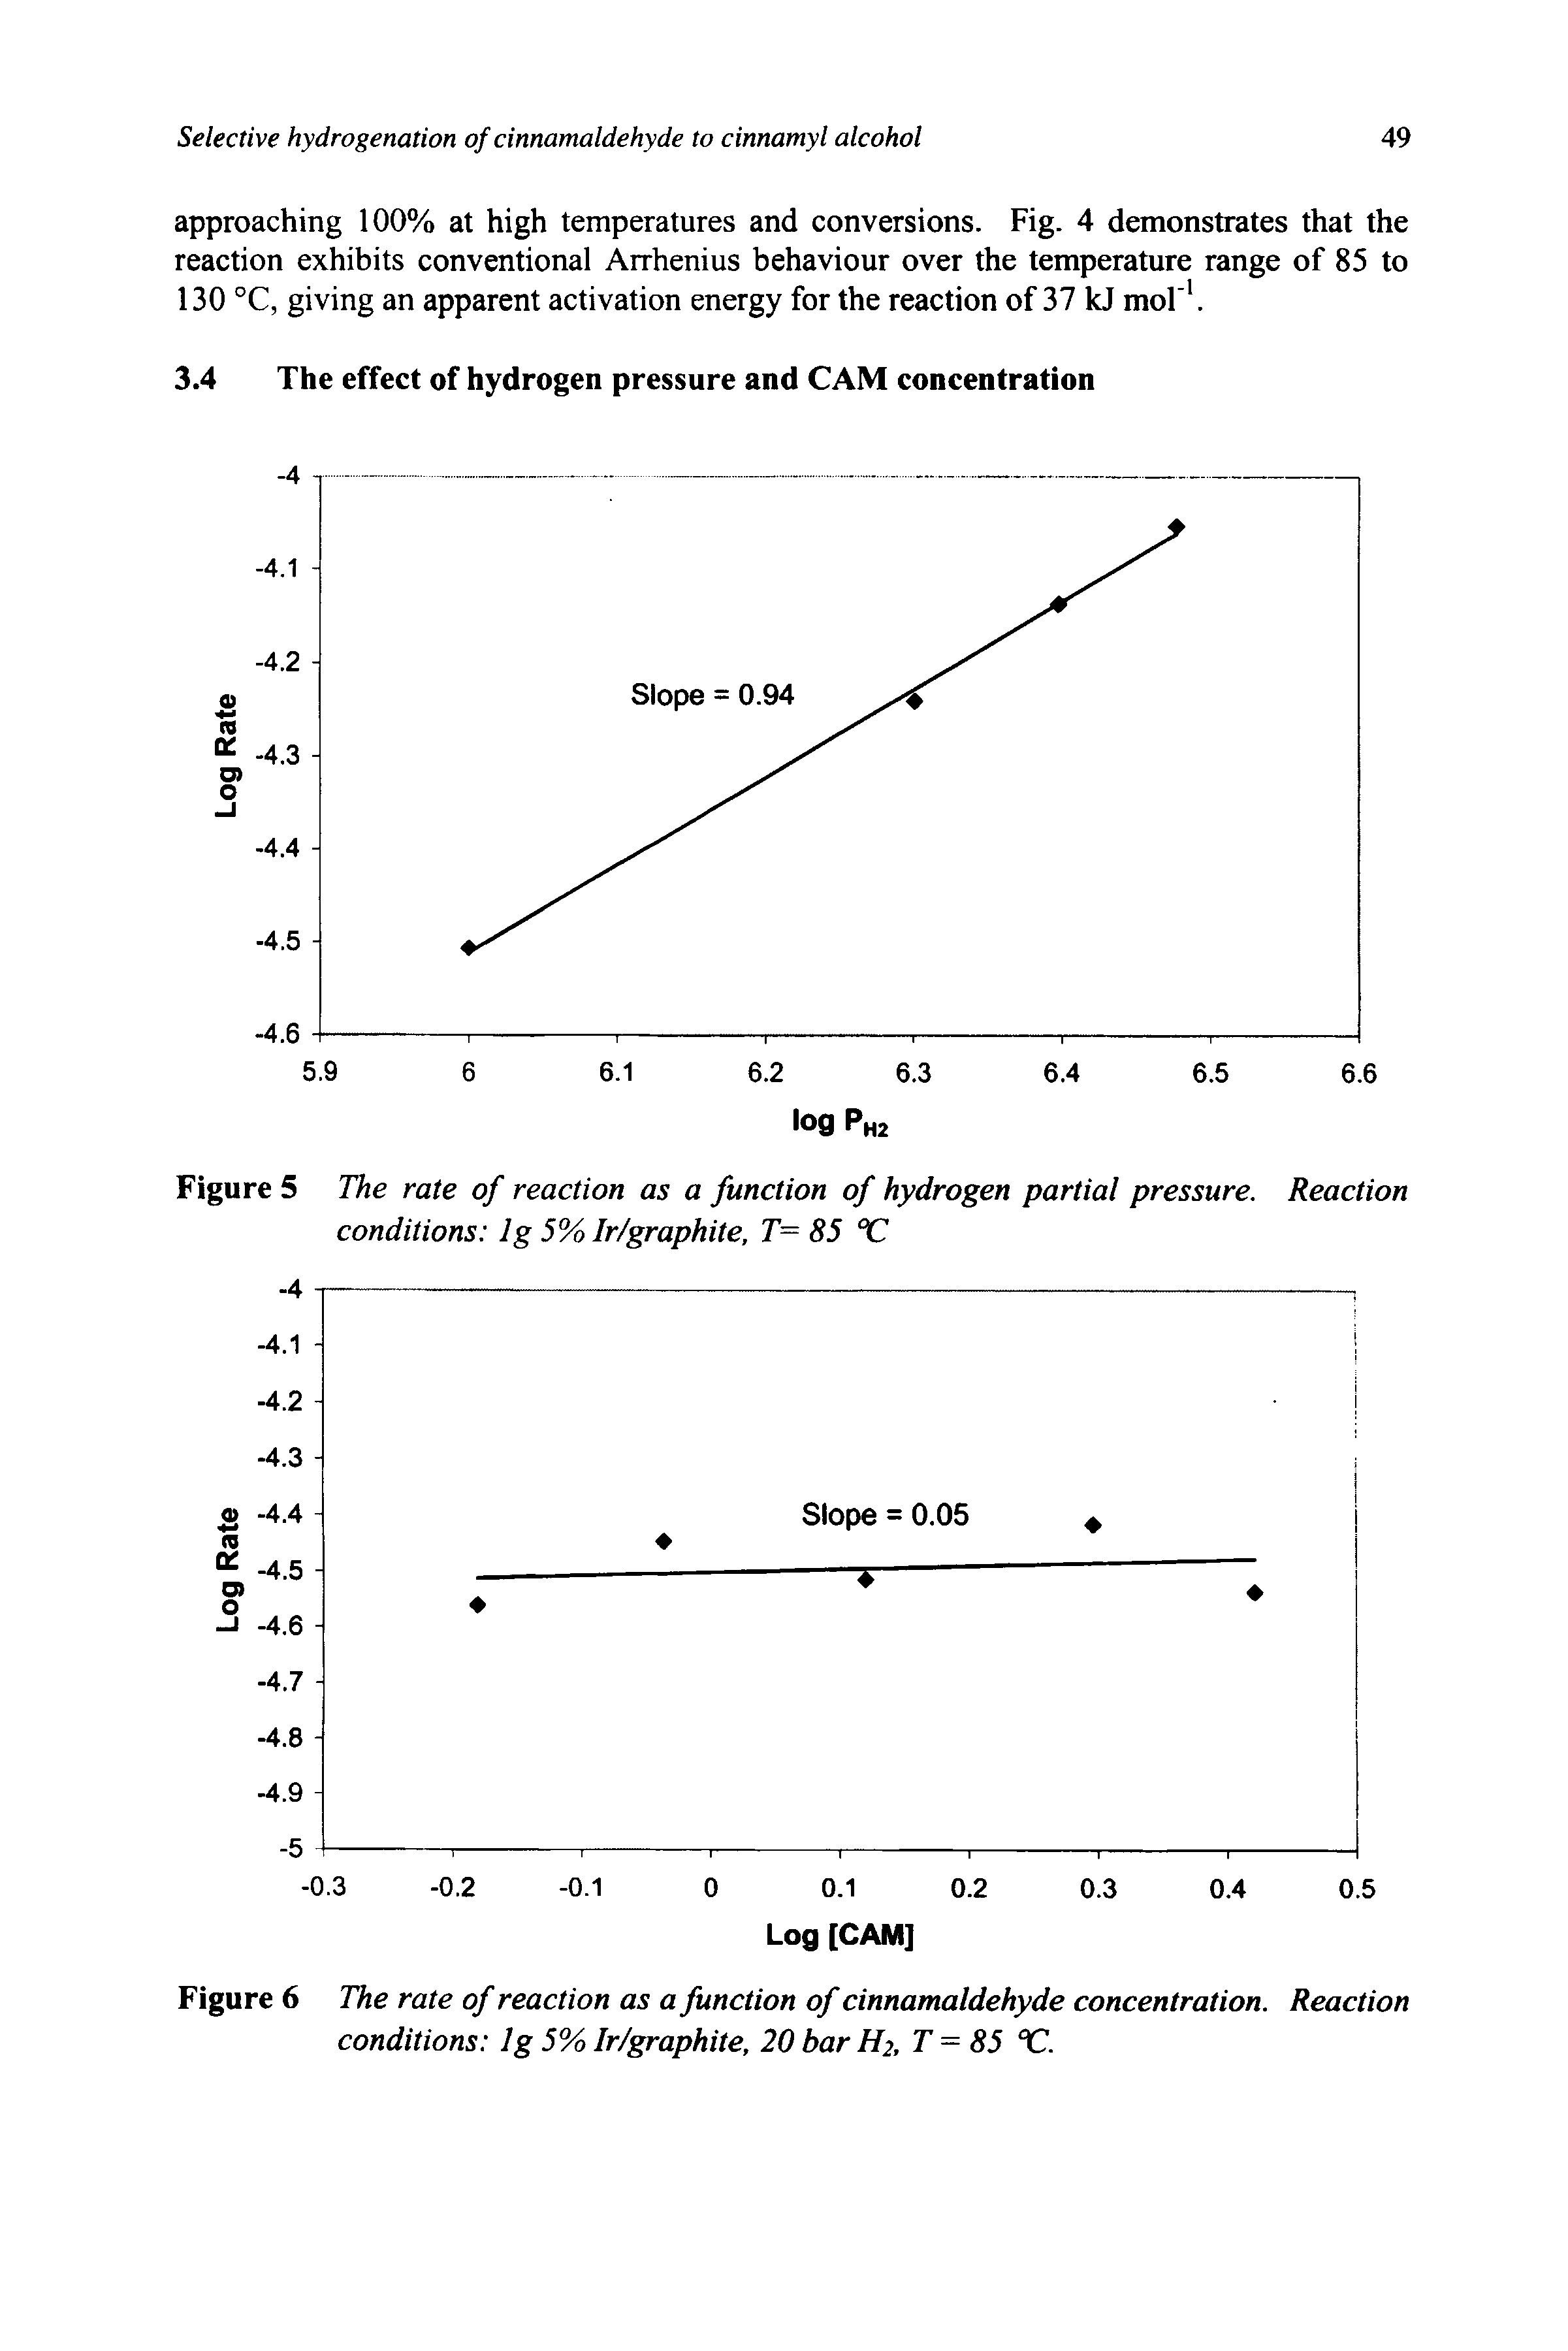 Figure 5 The rate of reaction as a function of hydrogen partial pressure. Reaction conditions 1 g 5% Ir/graphite, T= 85 C...